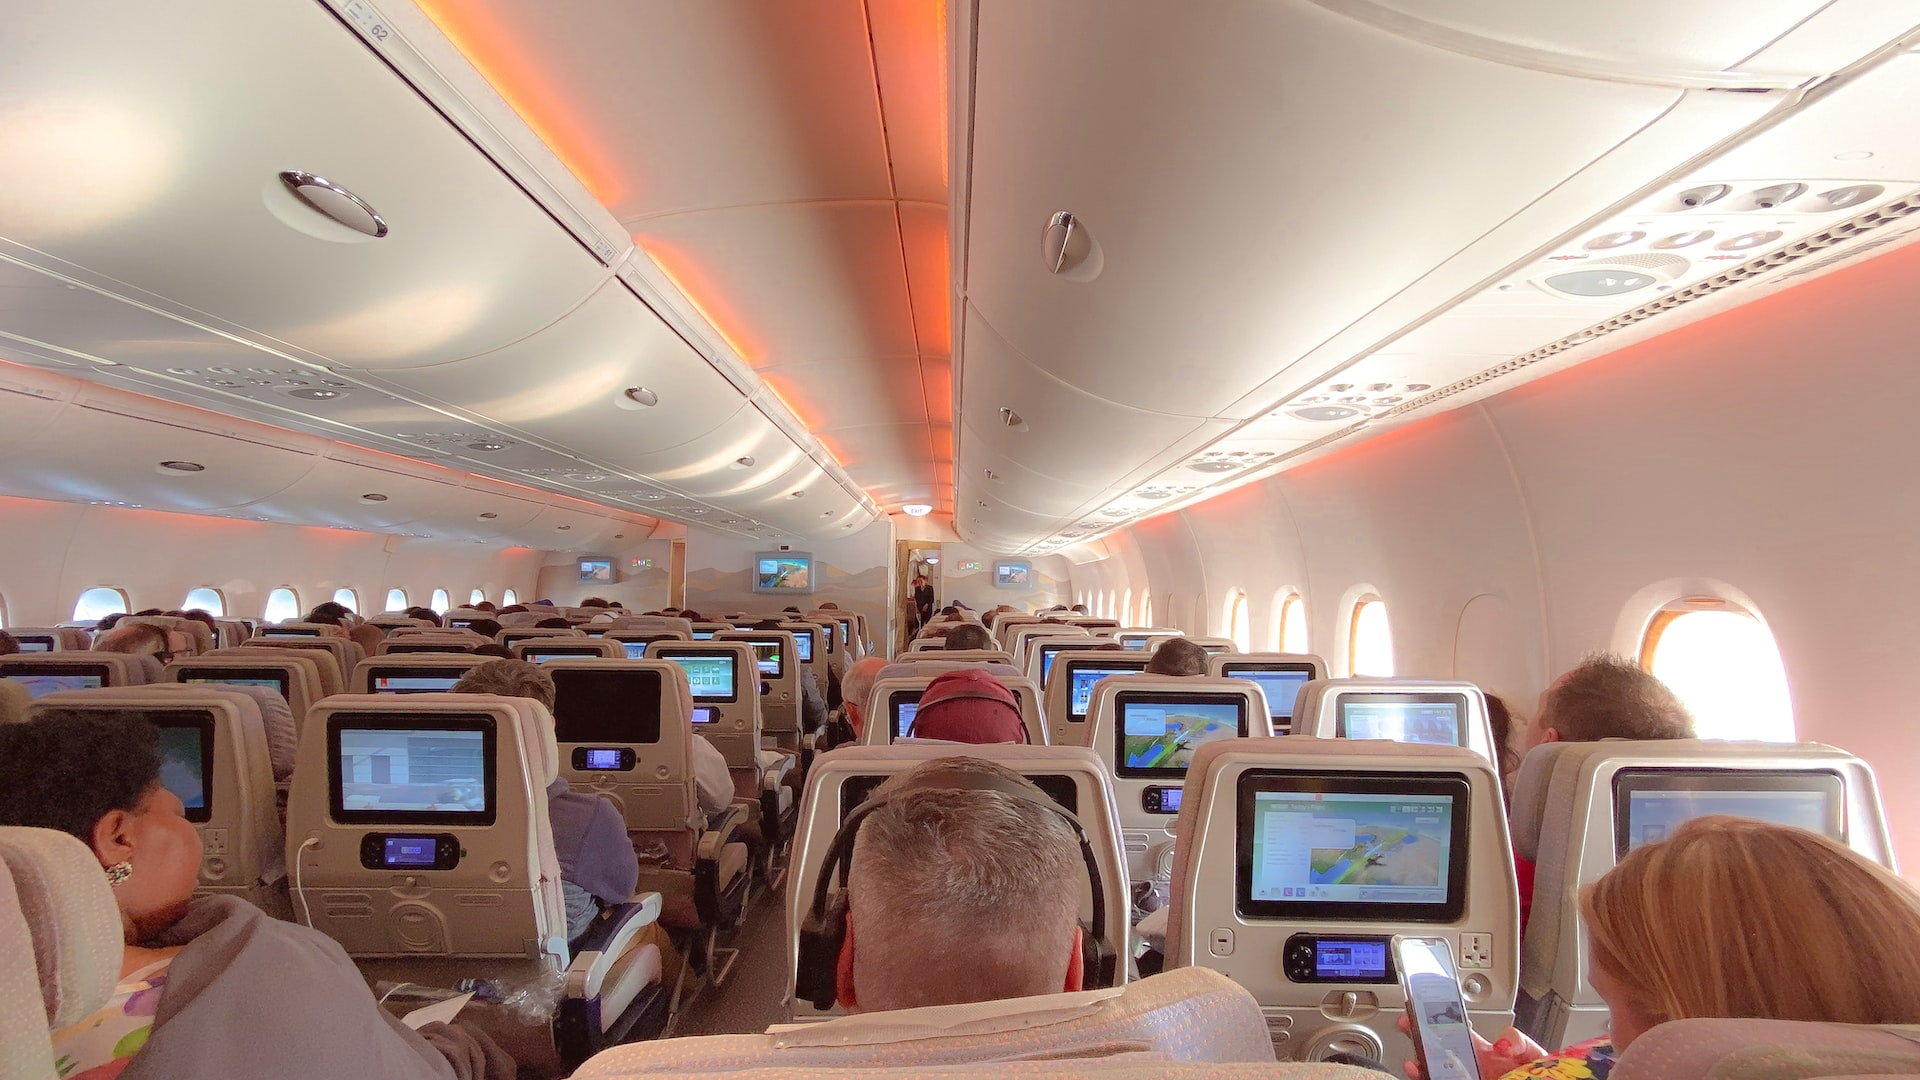 A spacious aircraft cabin with people sitting on their seats.